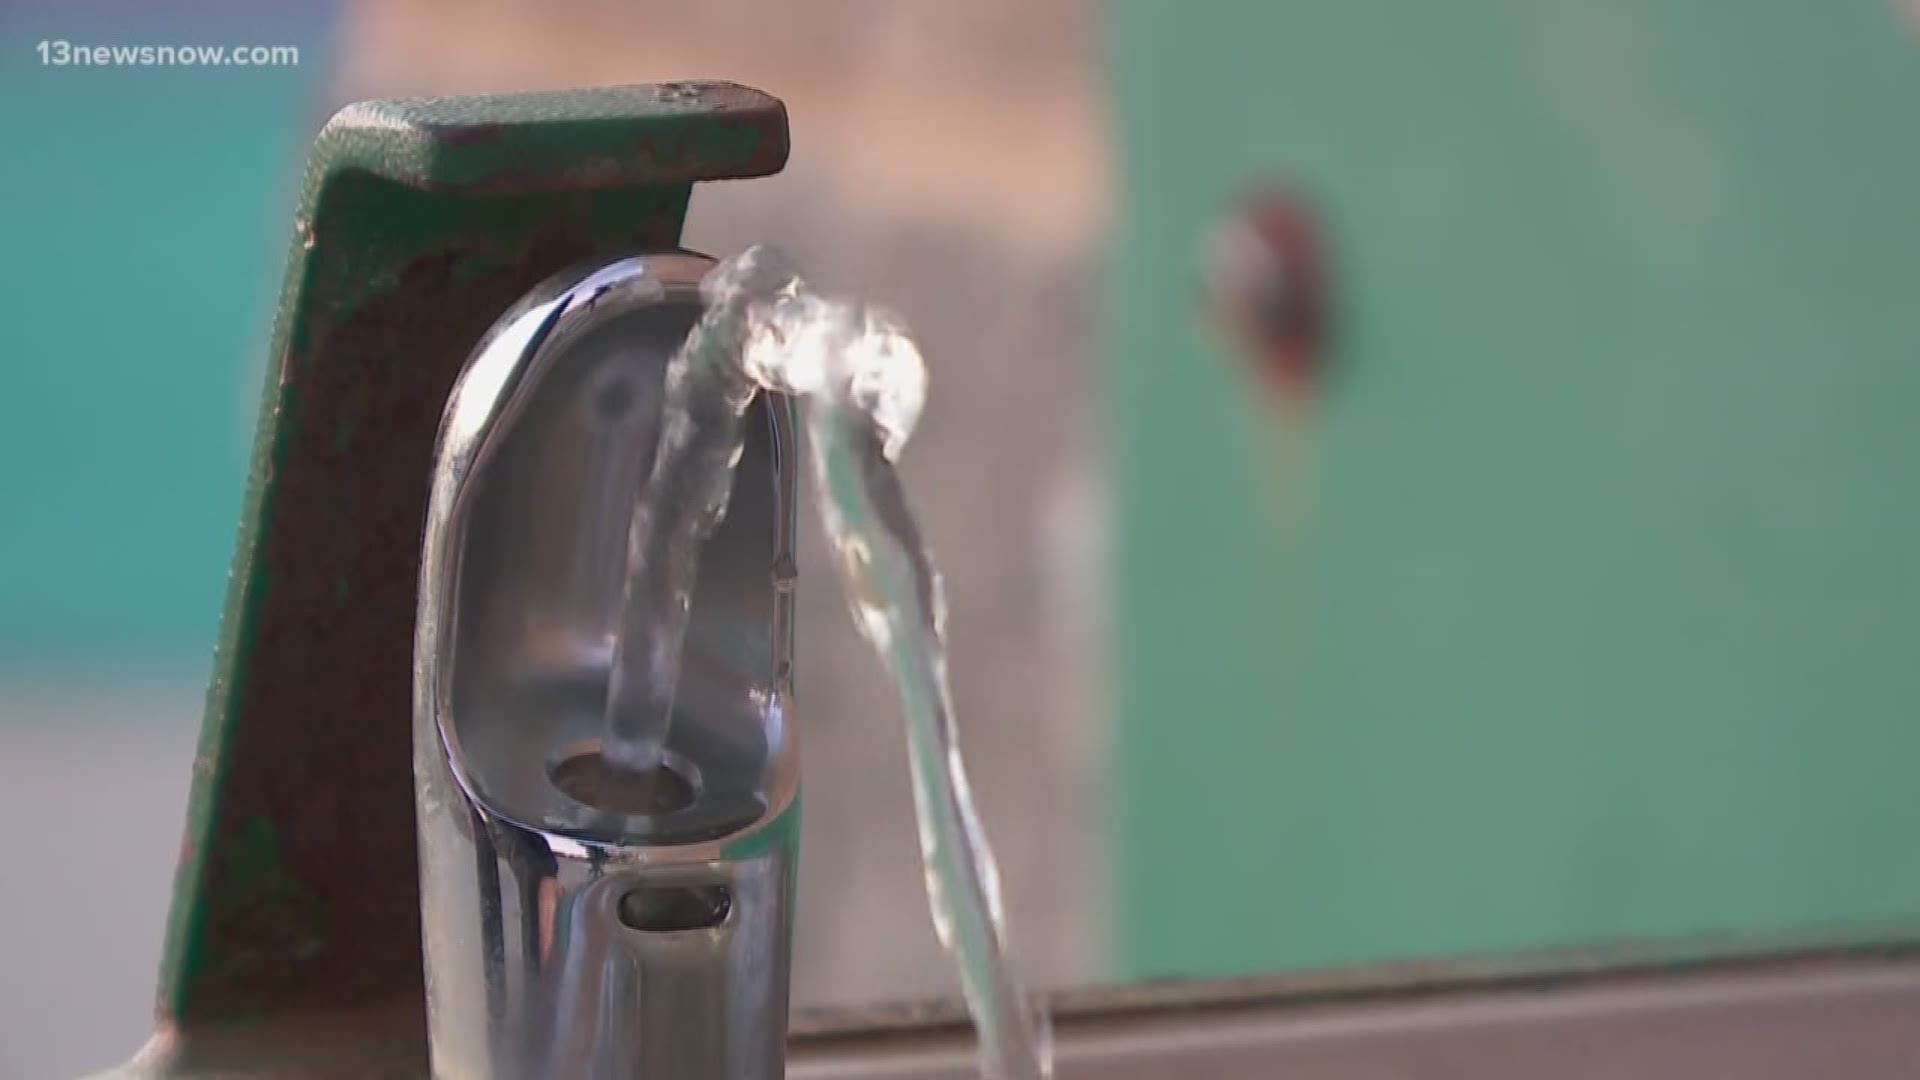 City leaders in Virginia Beach say they're improving the way they test drinking water and have started making changes.